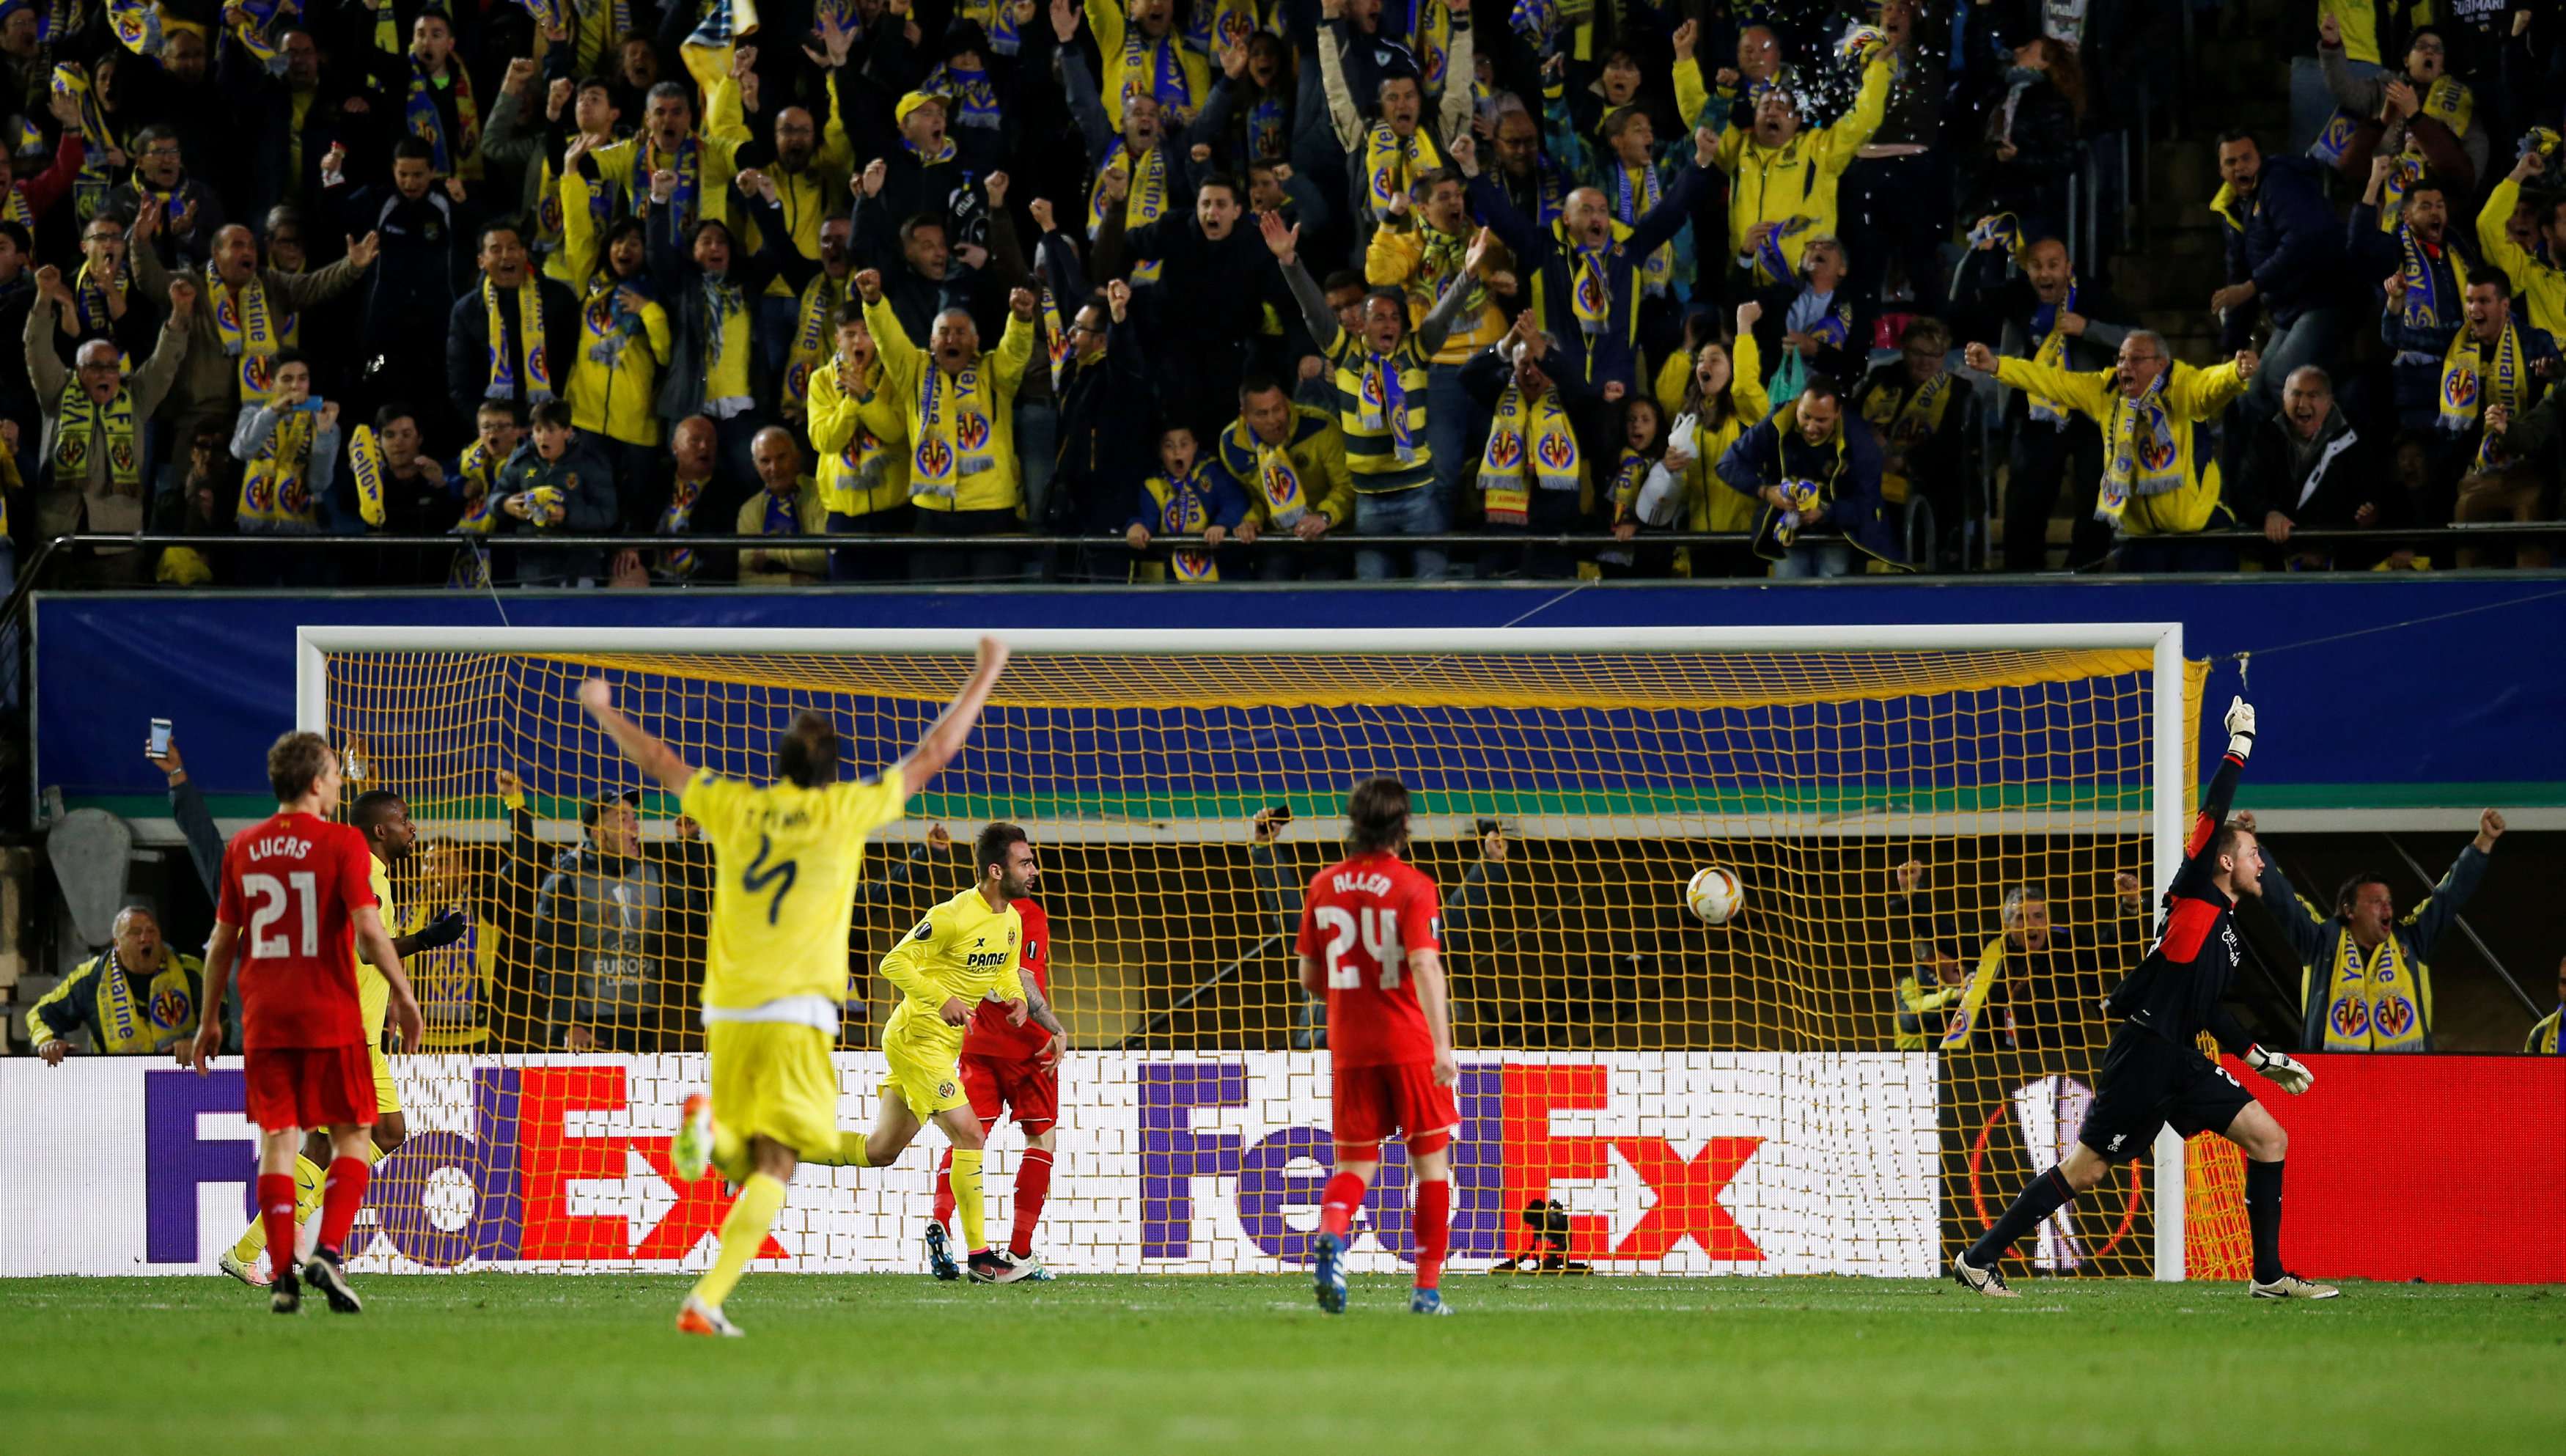 Villarreal celebrate scoring an invaluable winner at the death in the first leg against Liverpool. Photo: Reuters